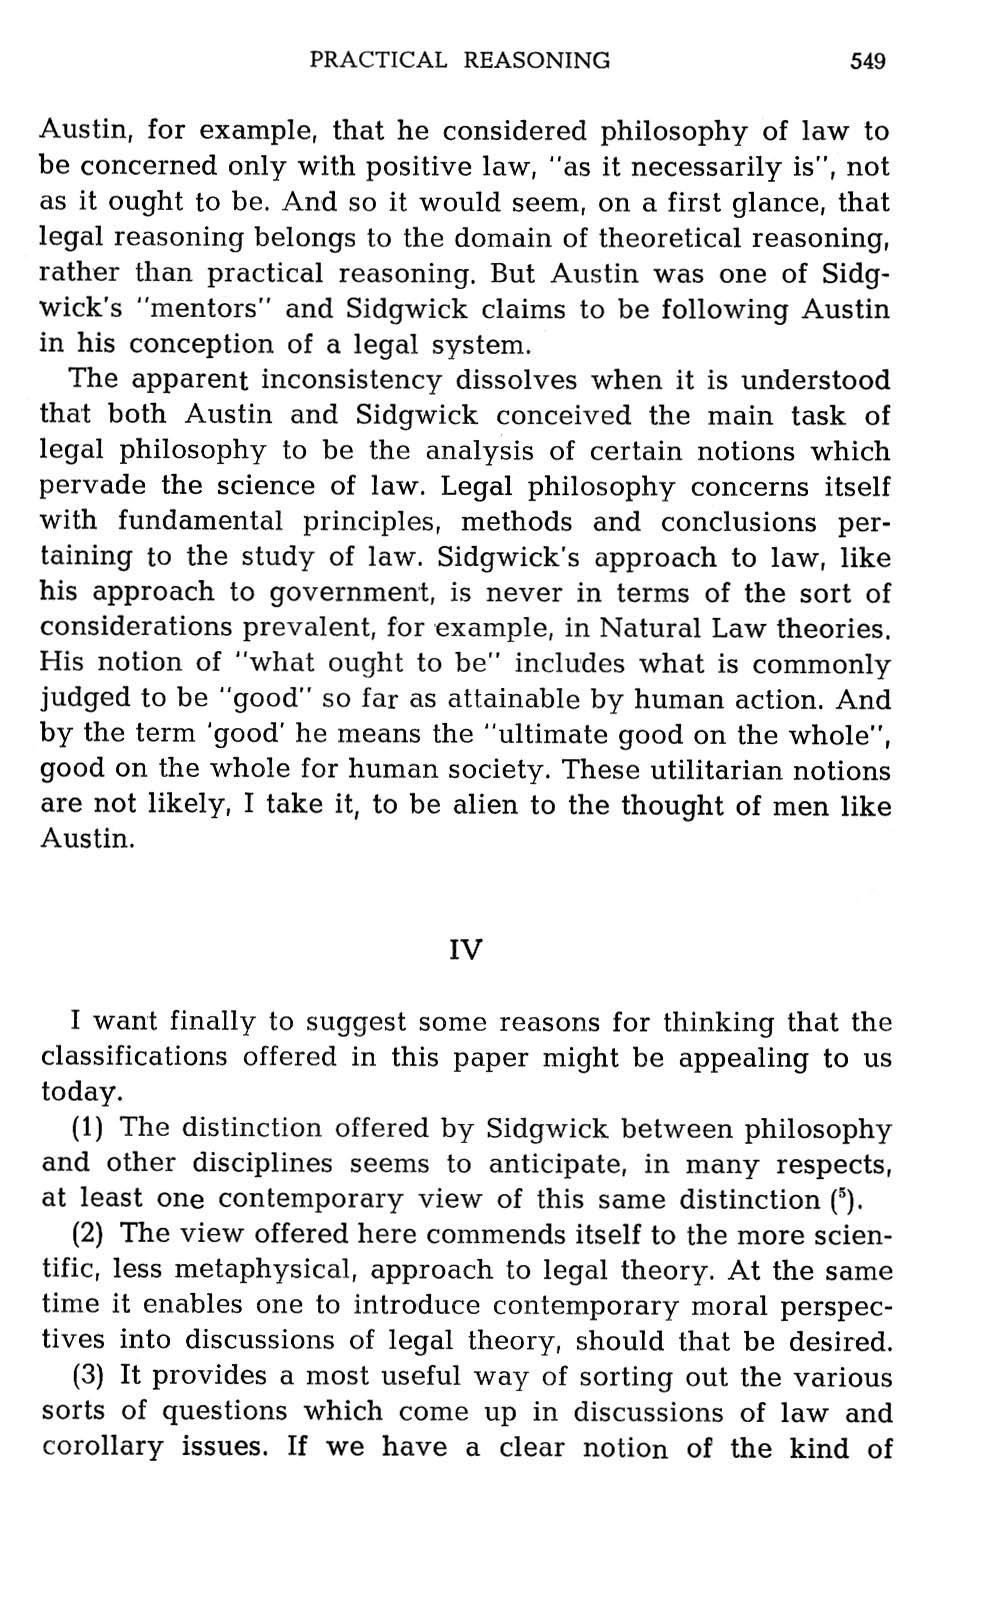 PRACTICAL REASONING 5 4 9 Austin, f o r example, that he considered philosophy o f la w to be concerned only with positive law, "as it necessarily is", not as it ought to be.